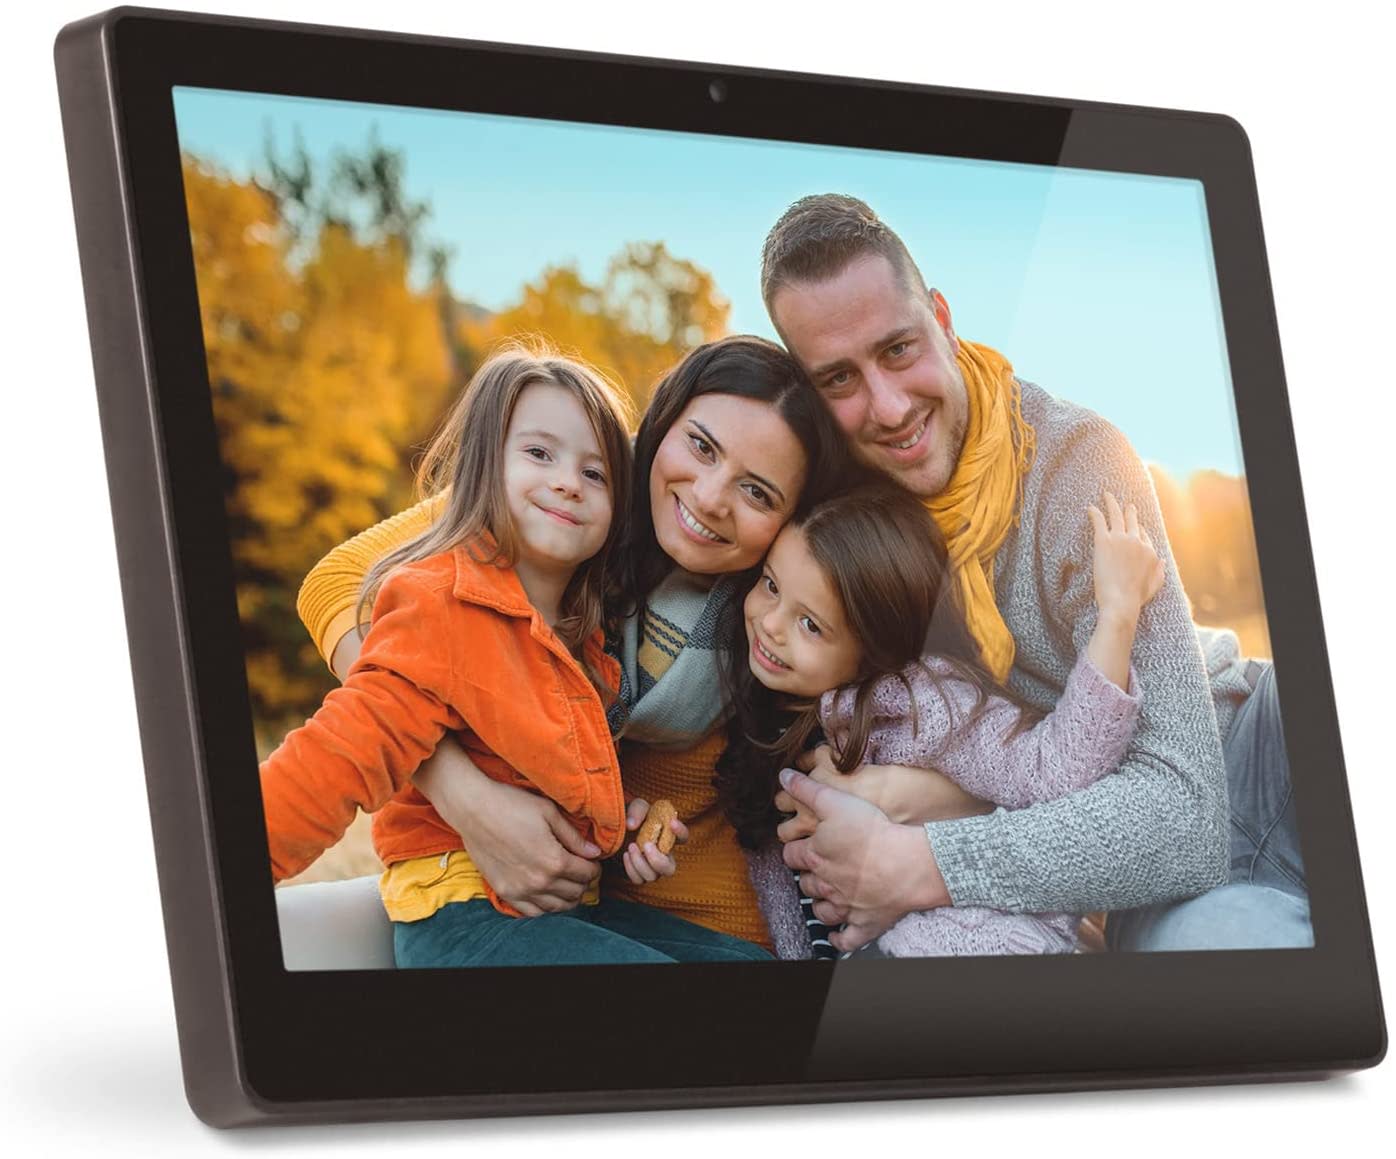 Aluratek WiFi Digital Photo Frame with Live Video Chat, Touchscreen LCD  Display and 16GB Built-in Memory 11.6 inch, Black